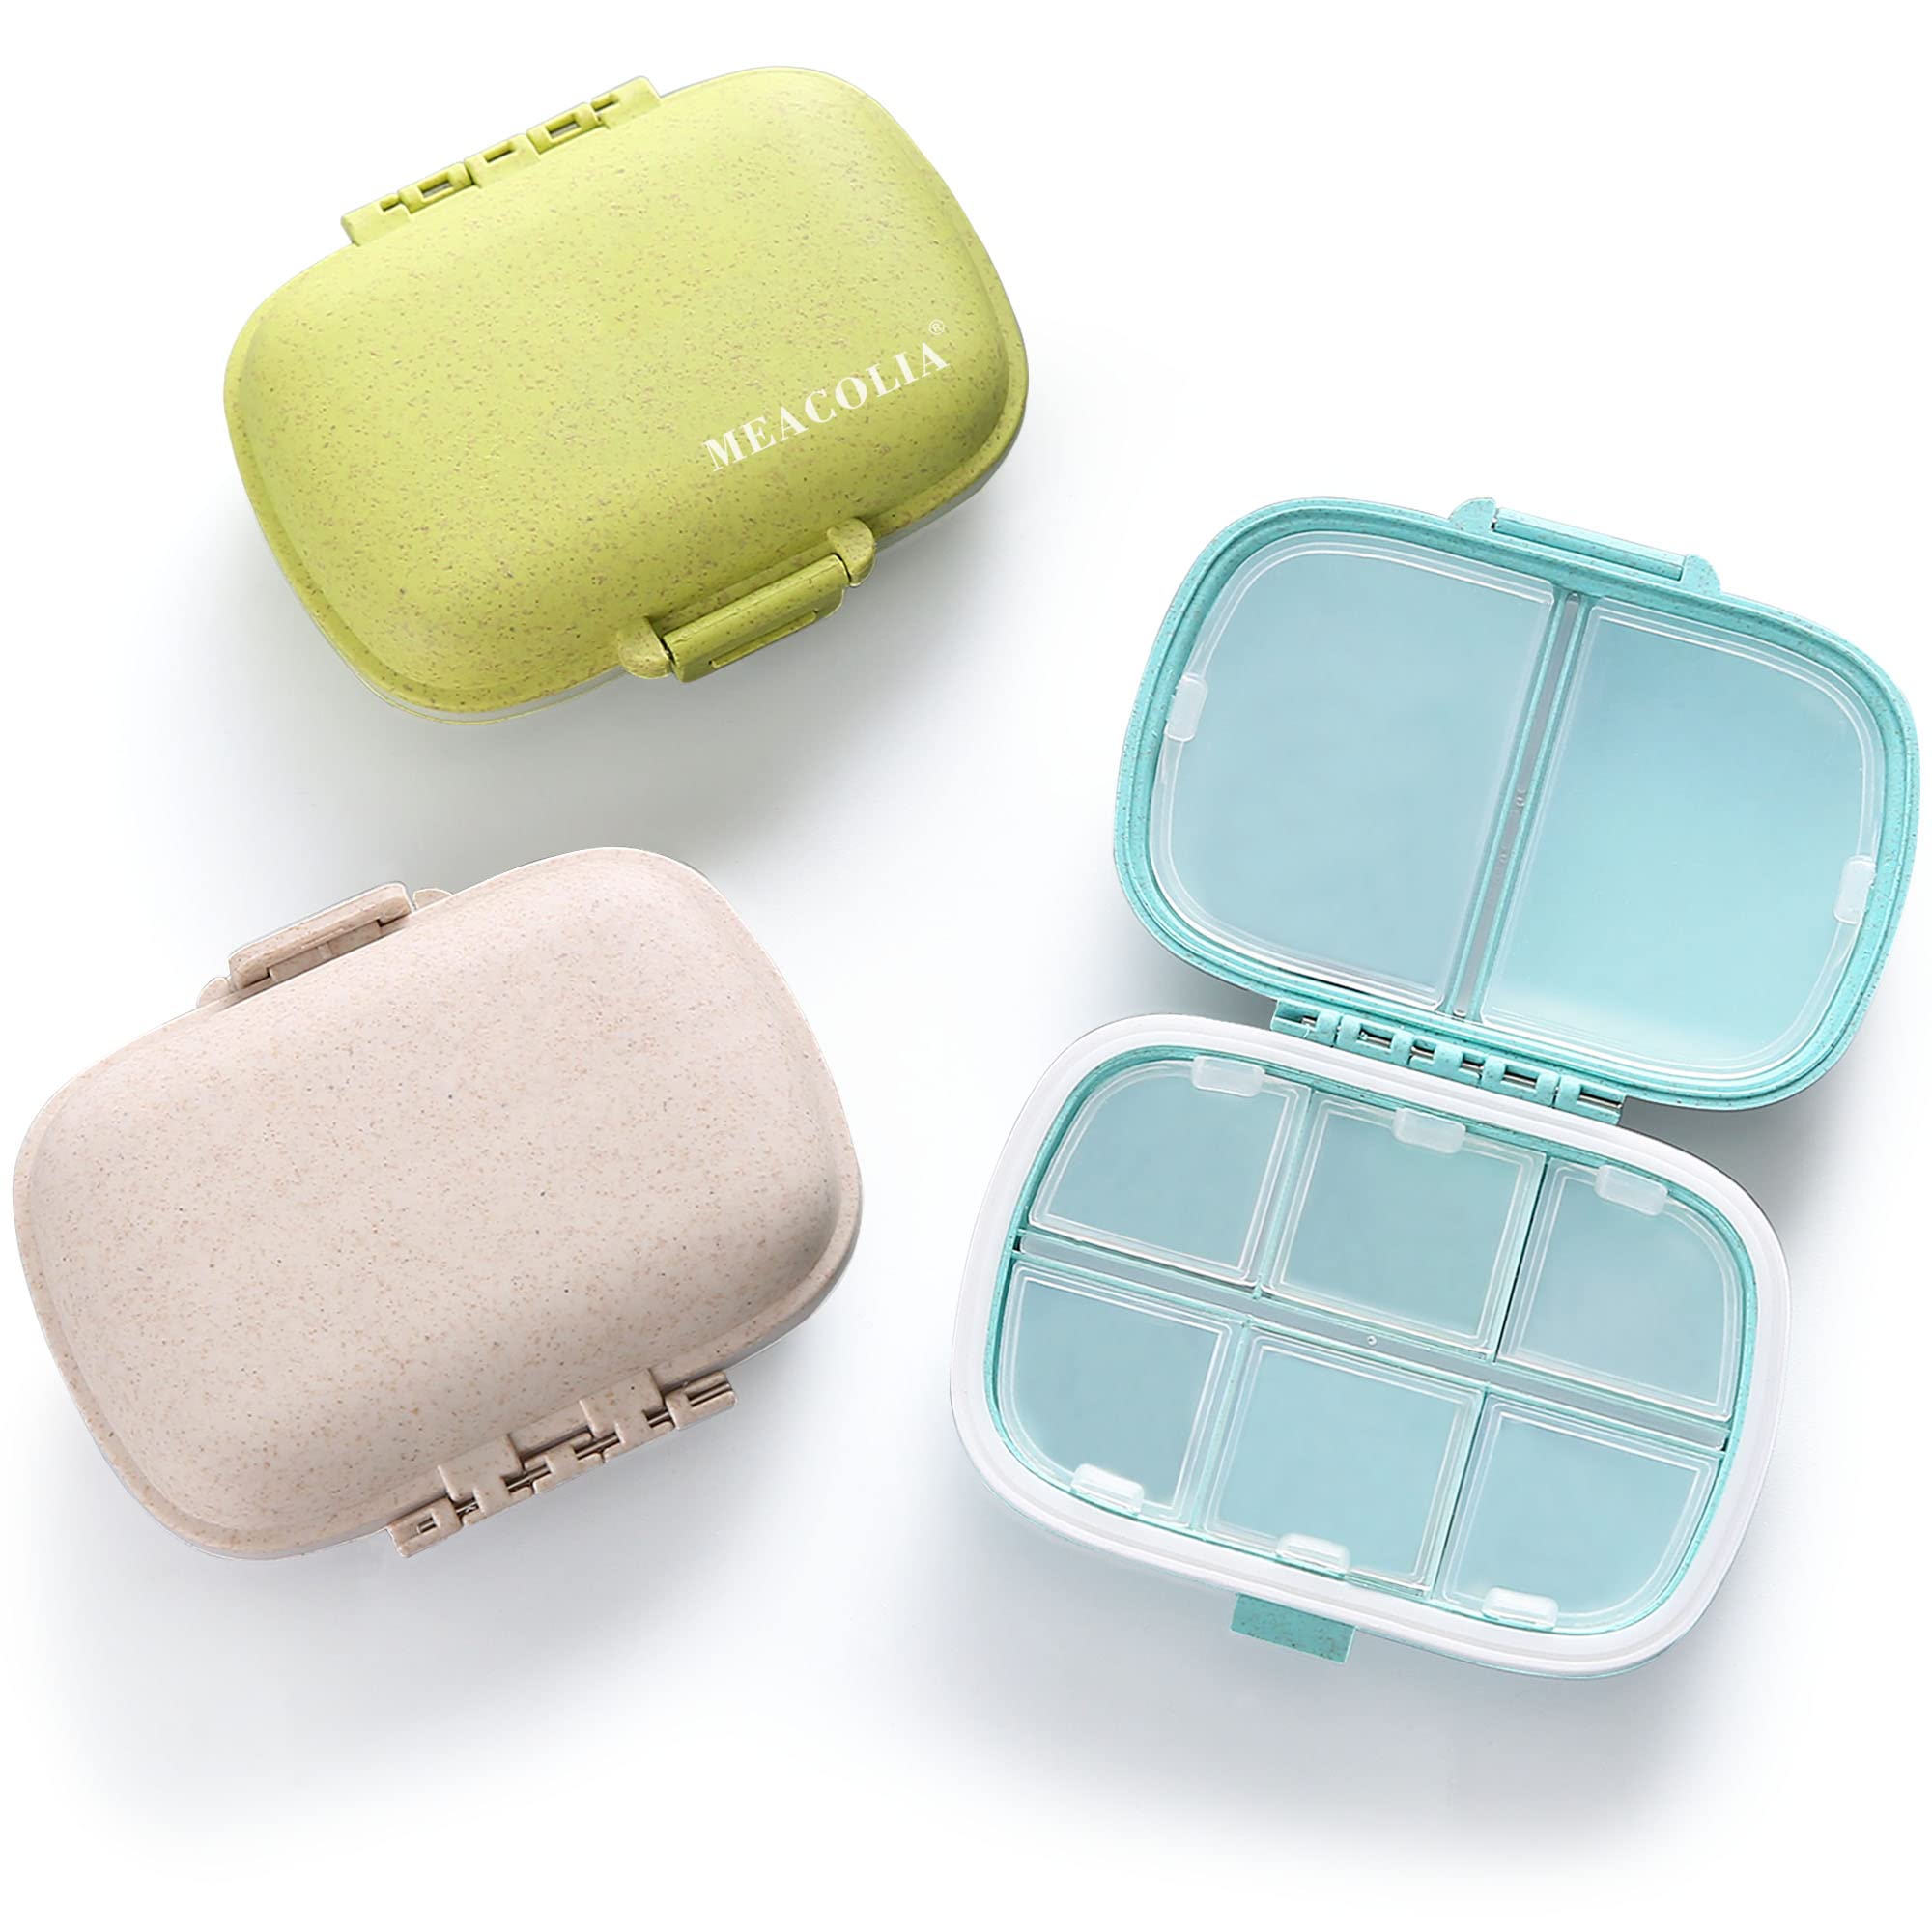 Pill Box - Portable Travel Medicine Organizer Case for Purse or Pocket,  Large Medication Pill Case 2 Times a Day for Vit at Rs 4150.00 | Pill Boxes  | ID: 2853036922488